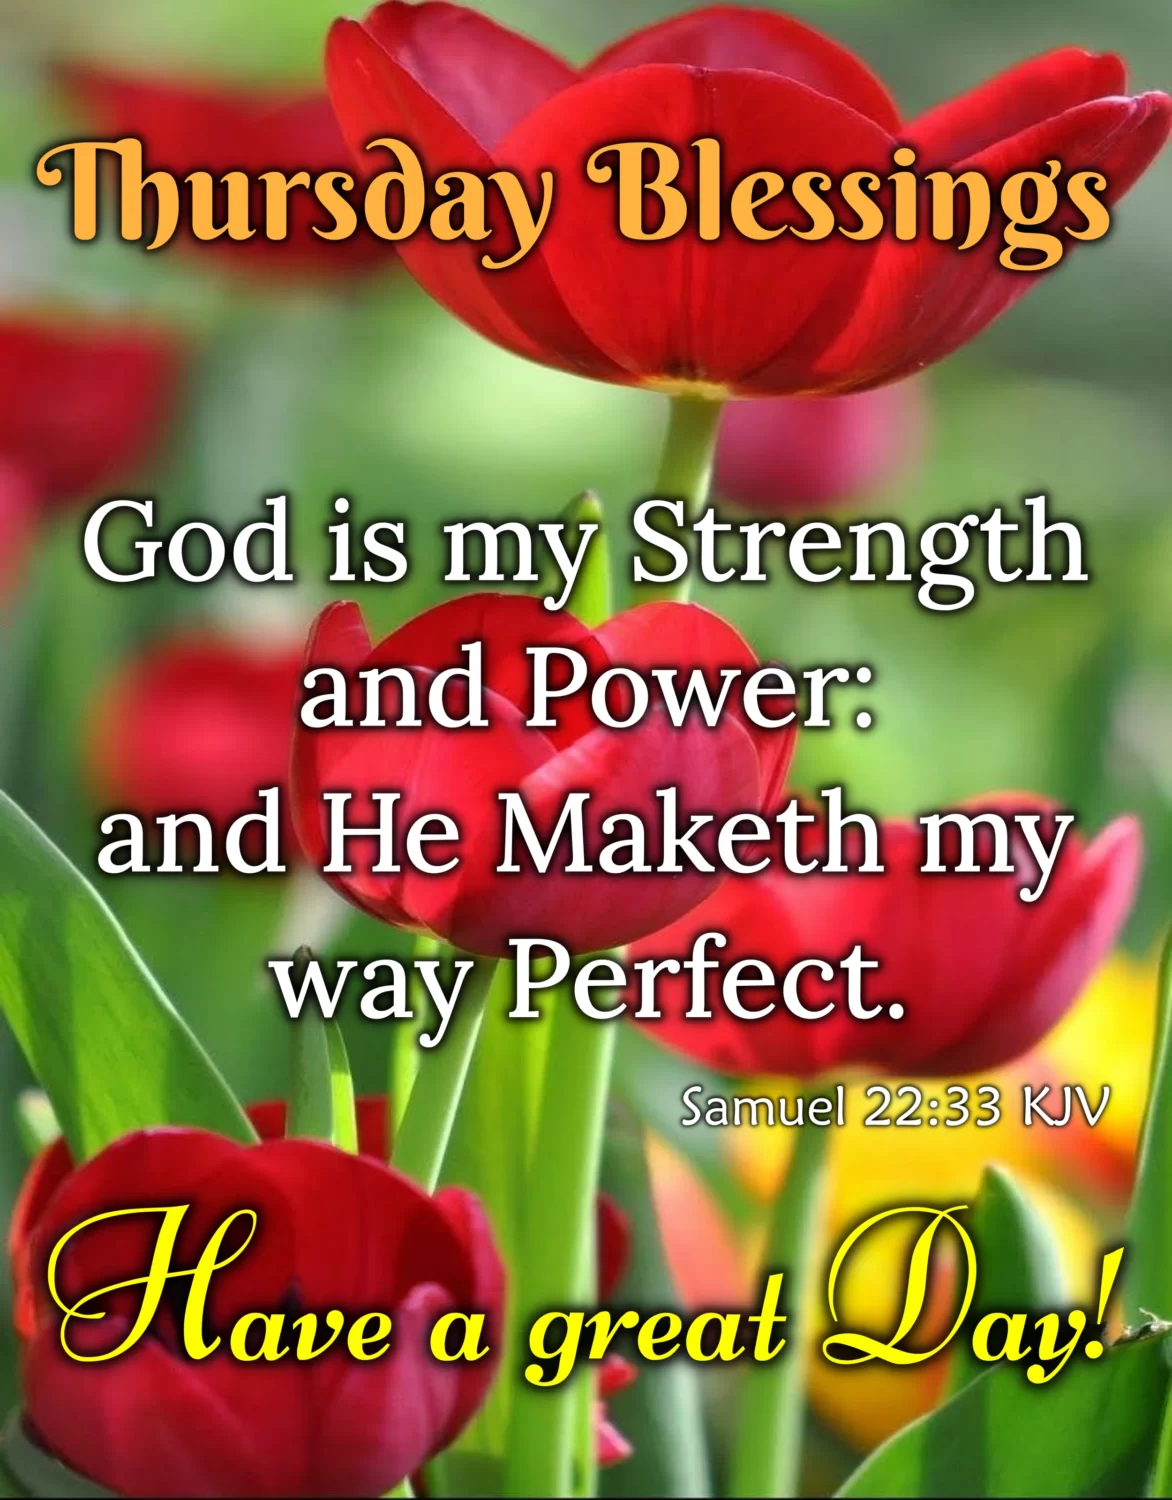 Thursday blessings with red tulips, Happy Thursday quotes.